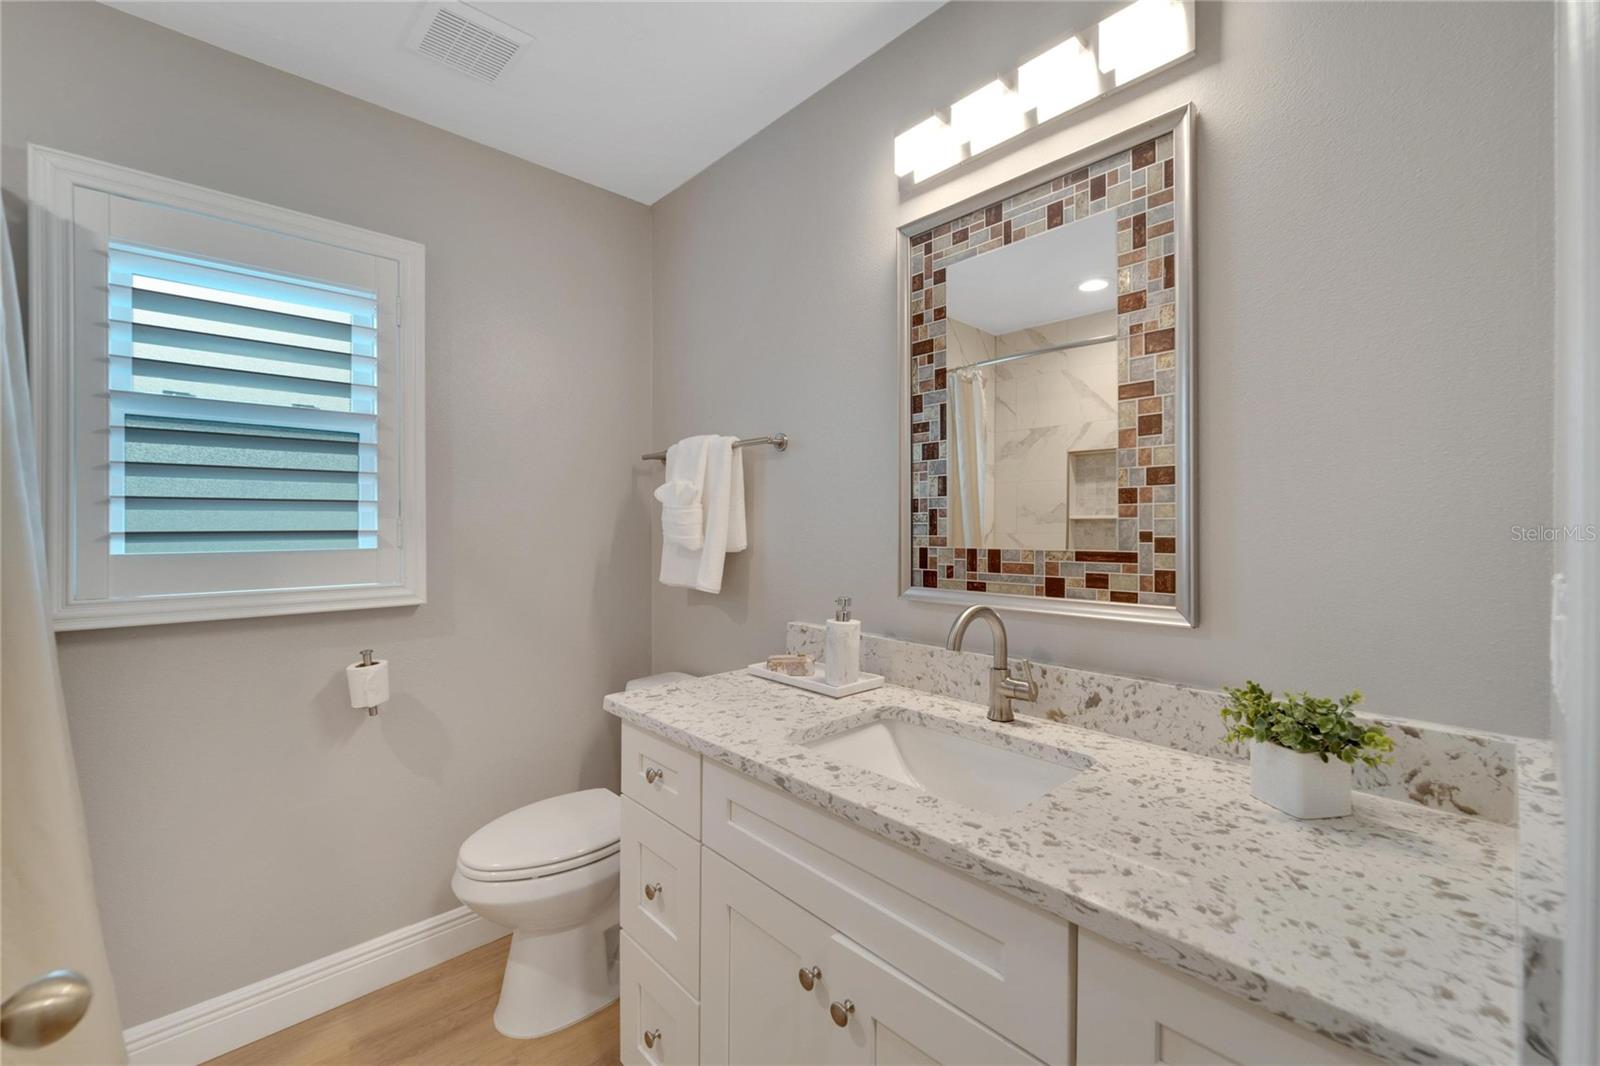 Bathroom #2, Shaker style cabinetry with soft close drawers and doors, updated lighting, stylish mirror, LVP flooring, Plantation Shutters